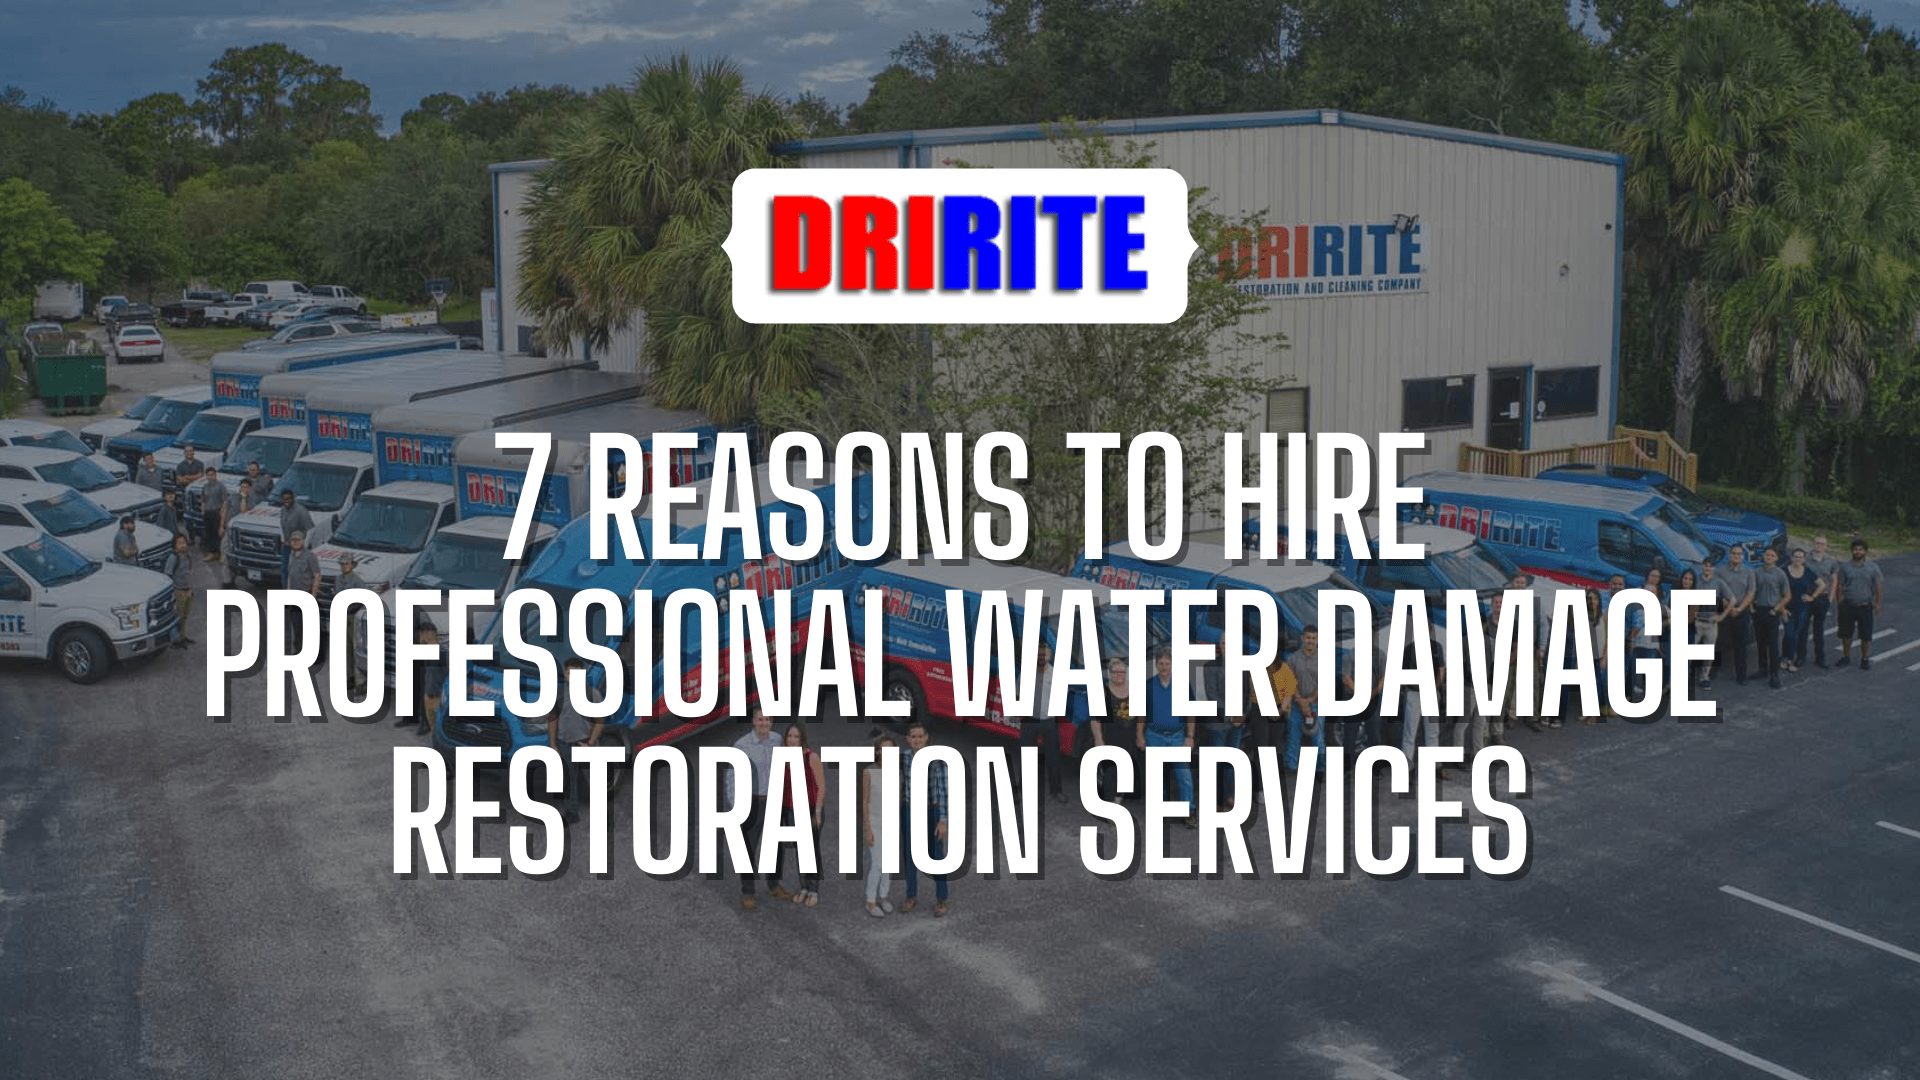 7 Reasons To Hire Professional Water Damage Restoration Services